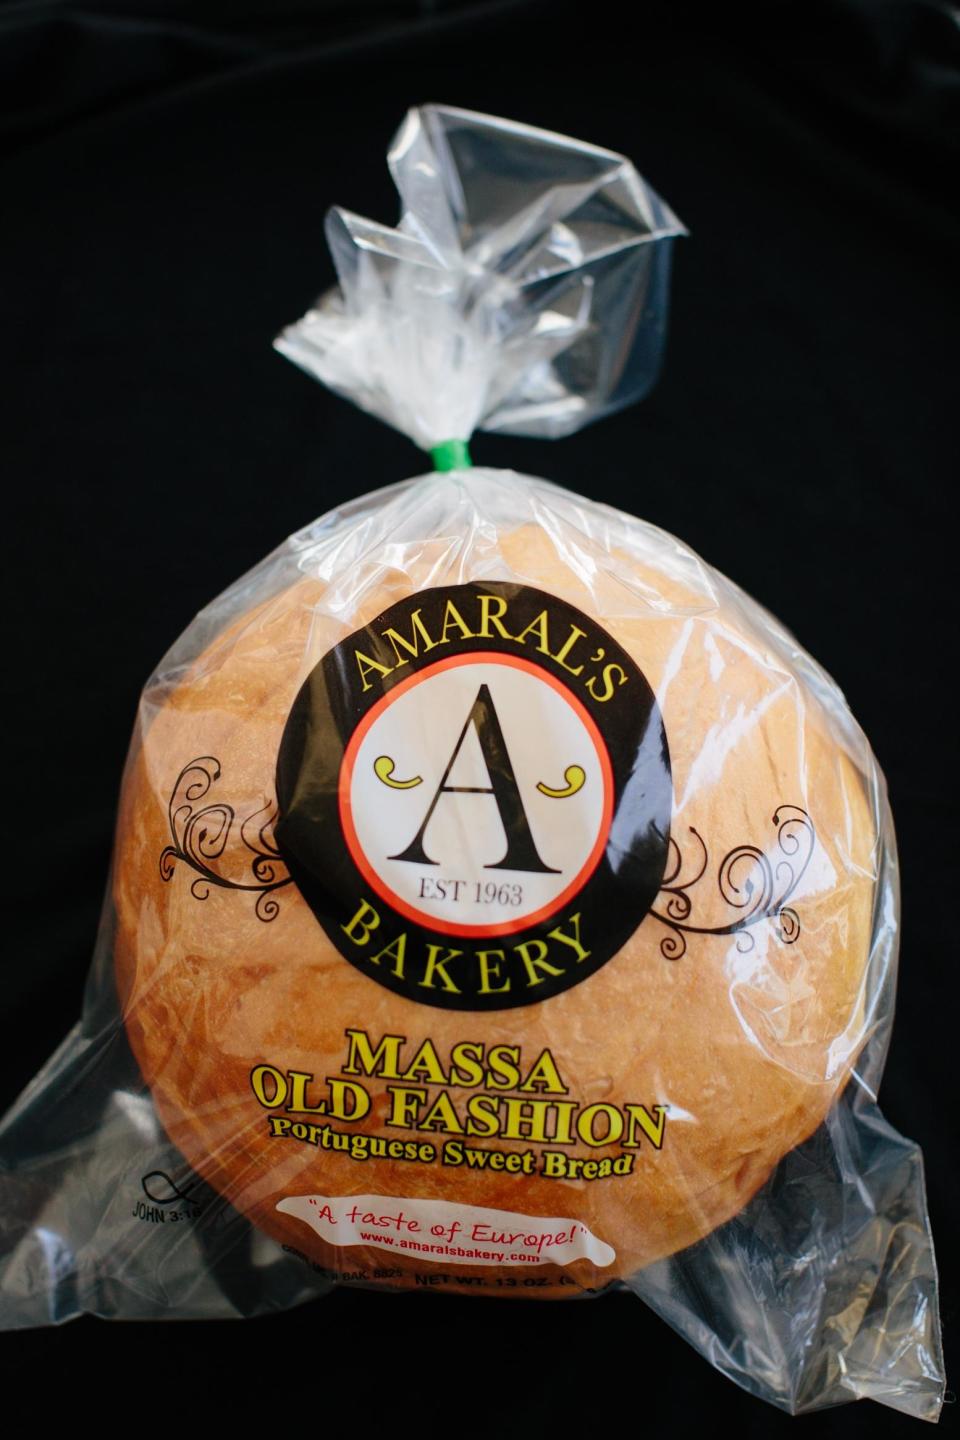 Portuguese sweet bread from Amaral's Bakery.